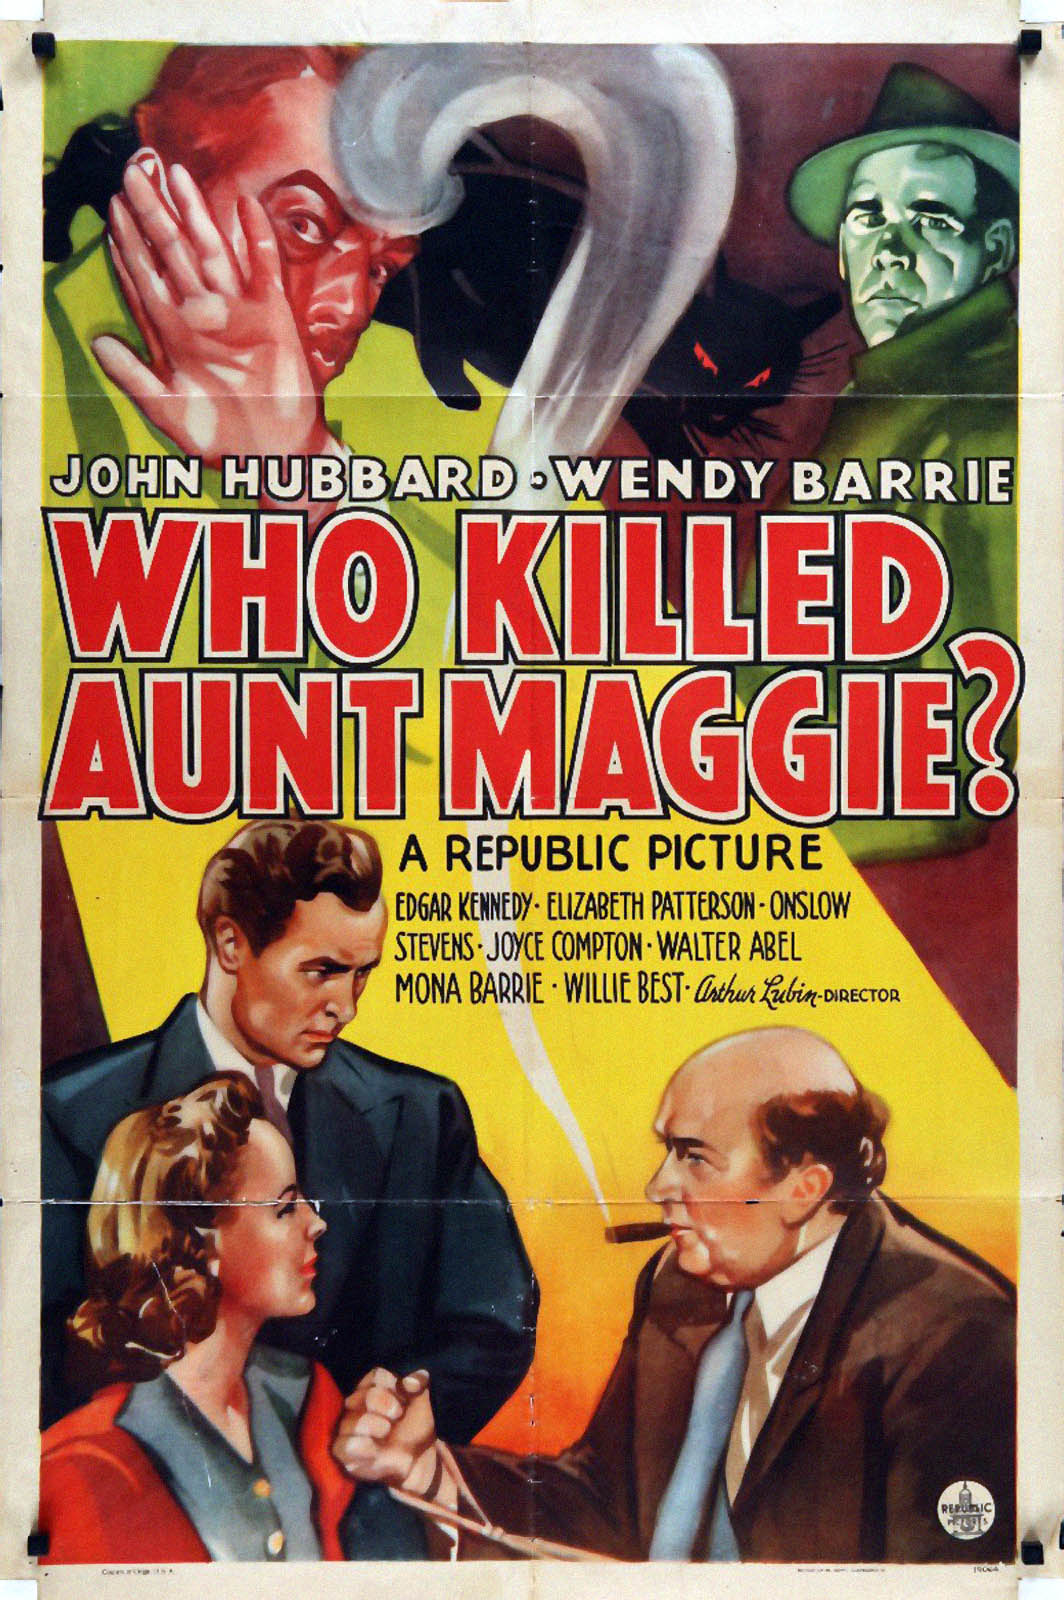 WHO KILLED AUNT MAGGIE?